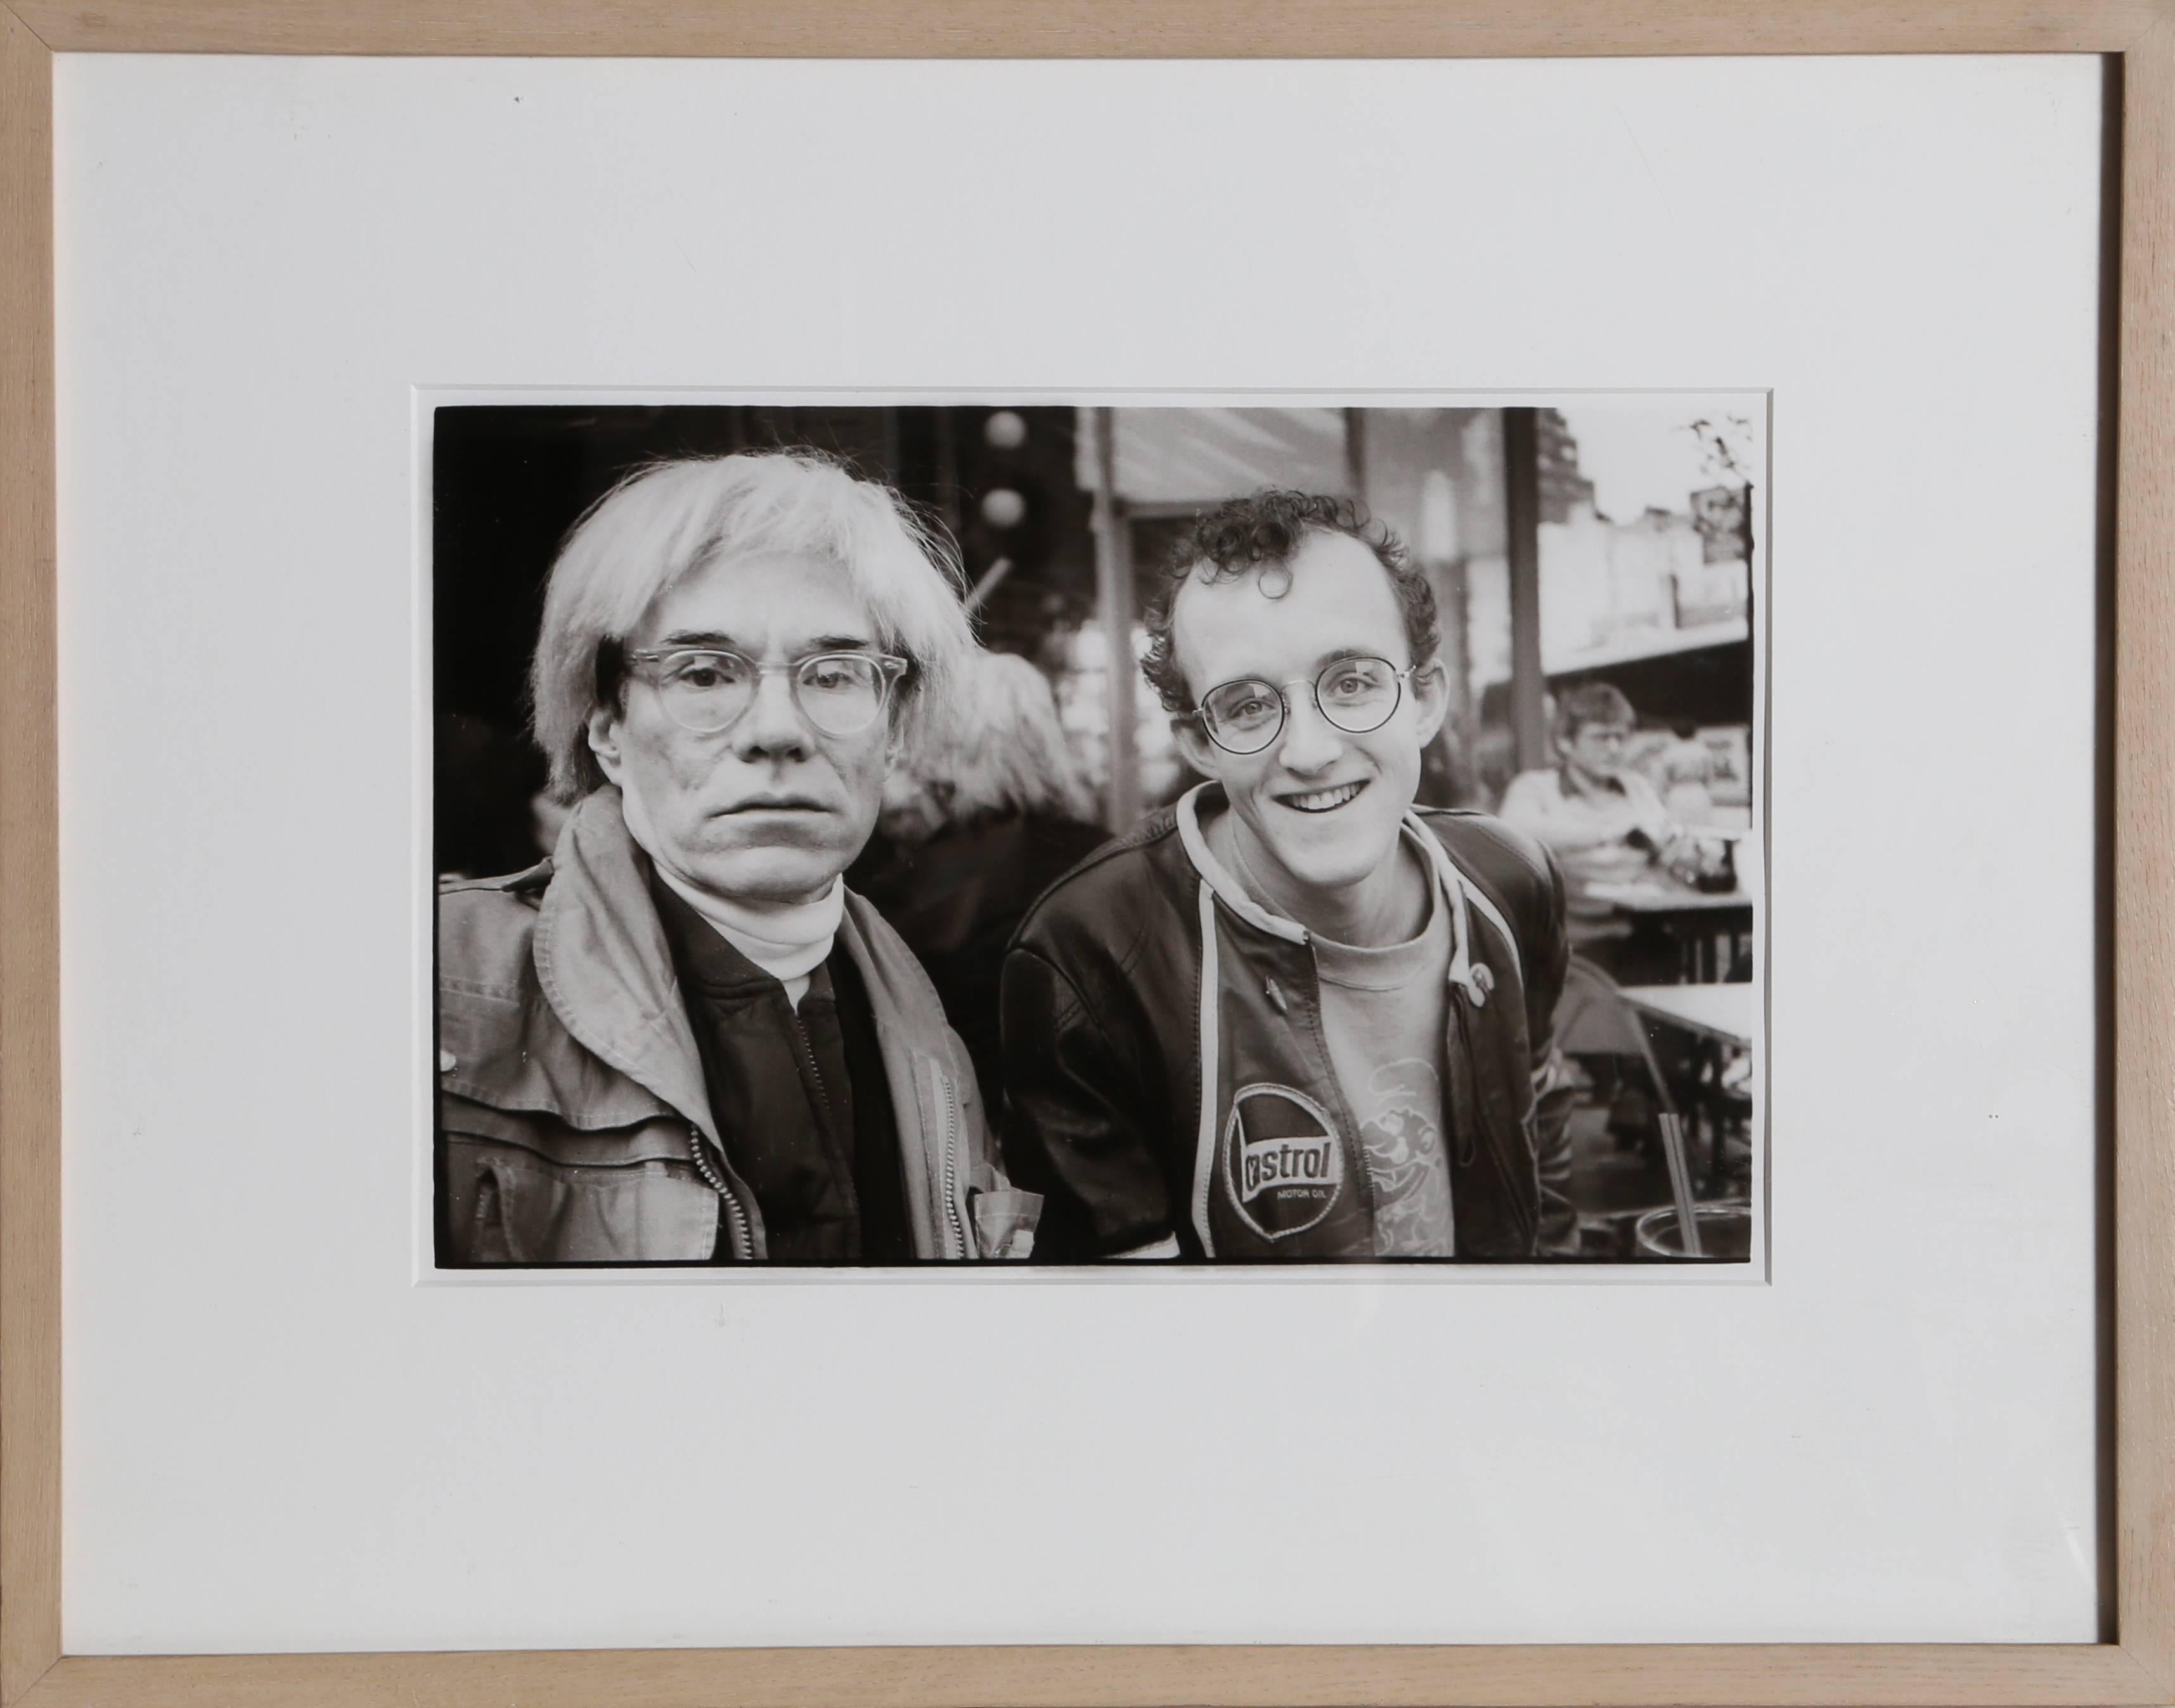 Artist: Christopher Makos, American (1948 - )
Title:	Andy Warhol and Keith Haring
Year:	1983
Medium:	Gelatin Silver Print Photograph, signed, stamped and numbered verso
Edition: 1/5
Image Size:	8 x 11 inches
Size: 11 x 14 inches
Frame: 15 x 18.75